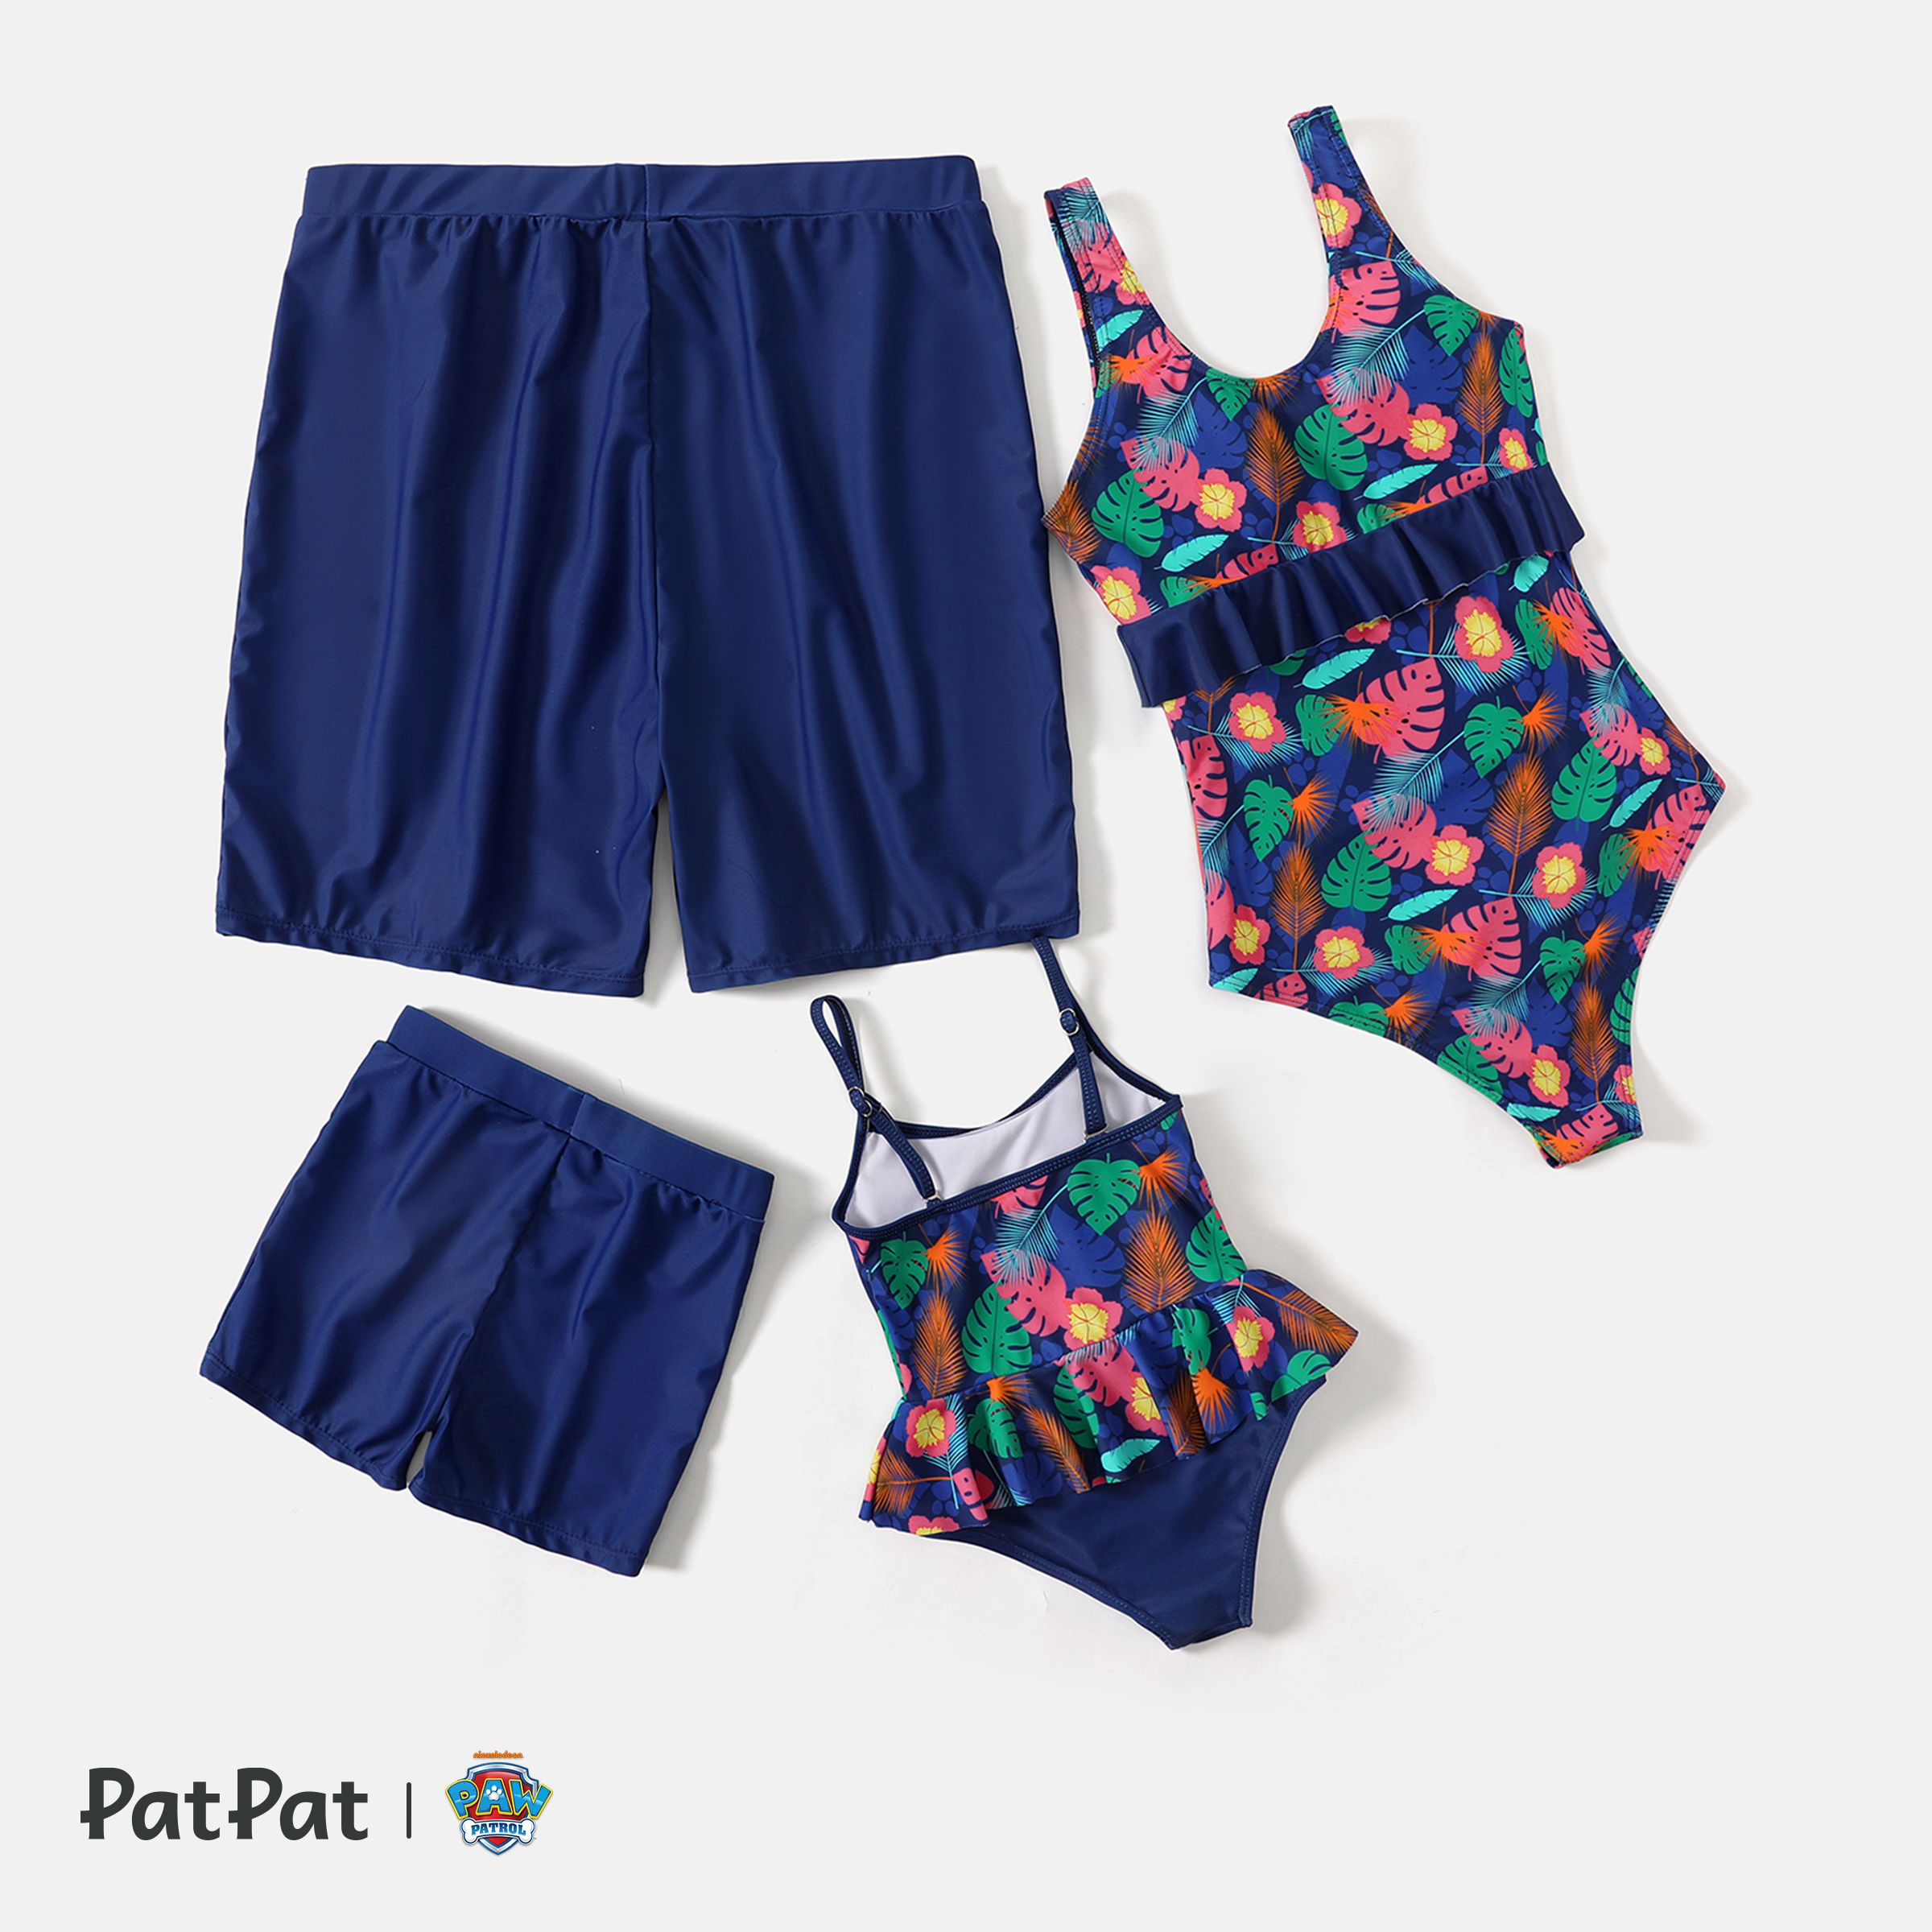 PAW Patrol Family Matching Allover Palm Leaf Print One-piece Swimsuit And Graphic Swim Trunks